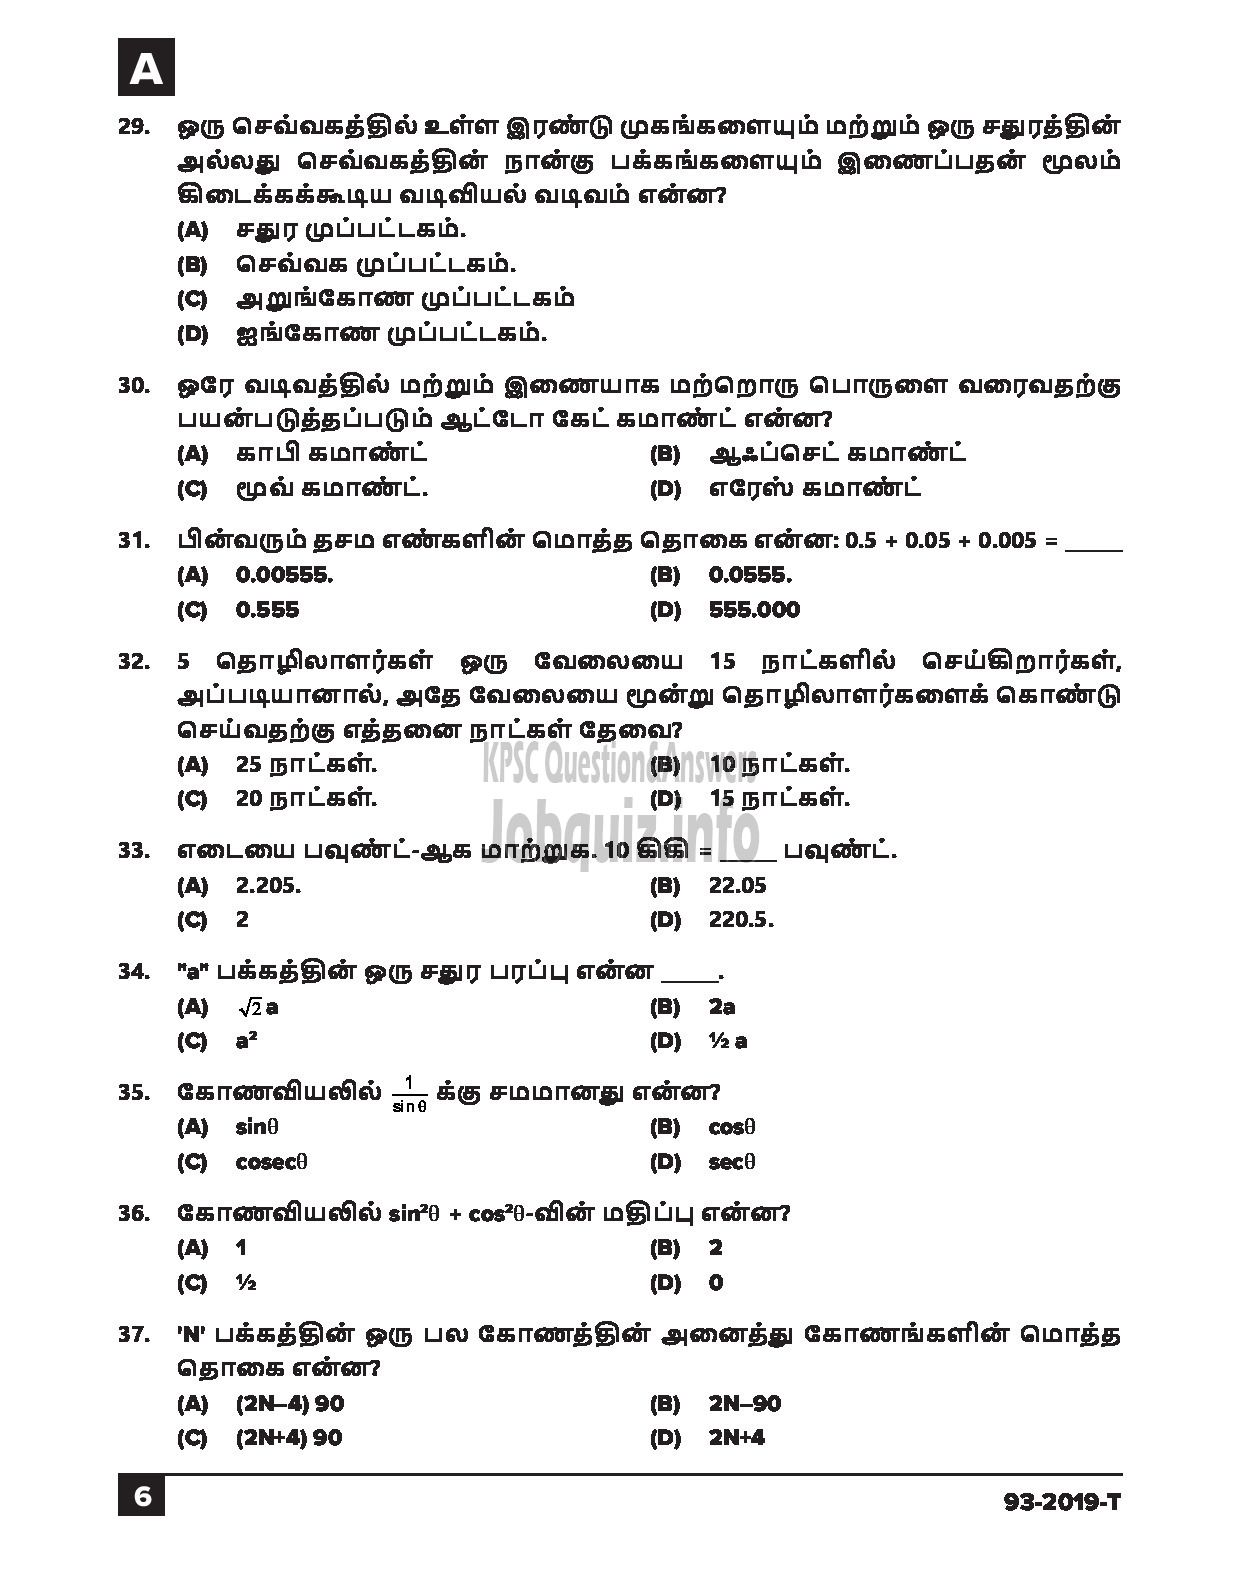 Kerala PSC Question Paper - Workshop Attender (Architectural Assistant) SR From SC/ST Industrial Training Tamil-6